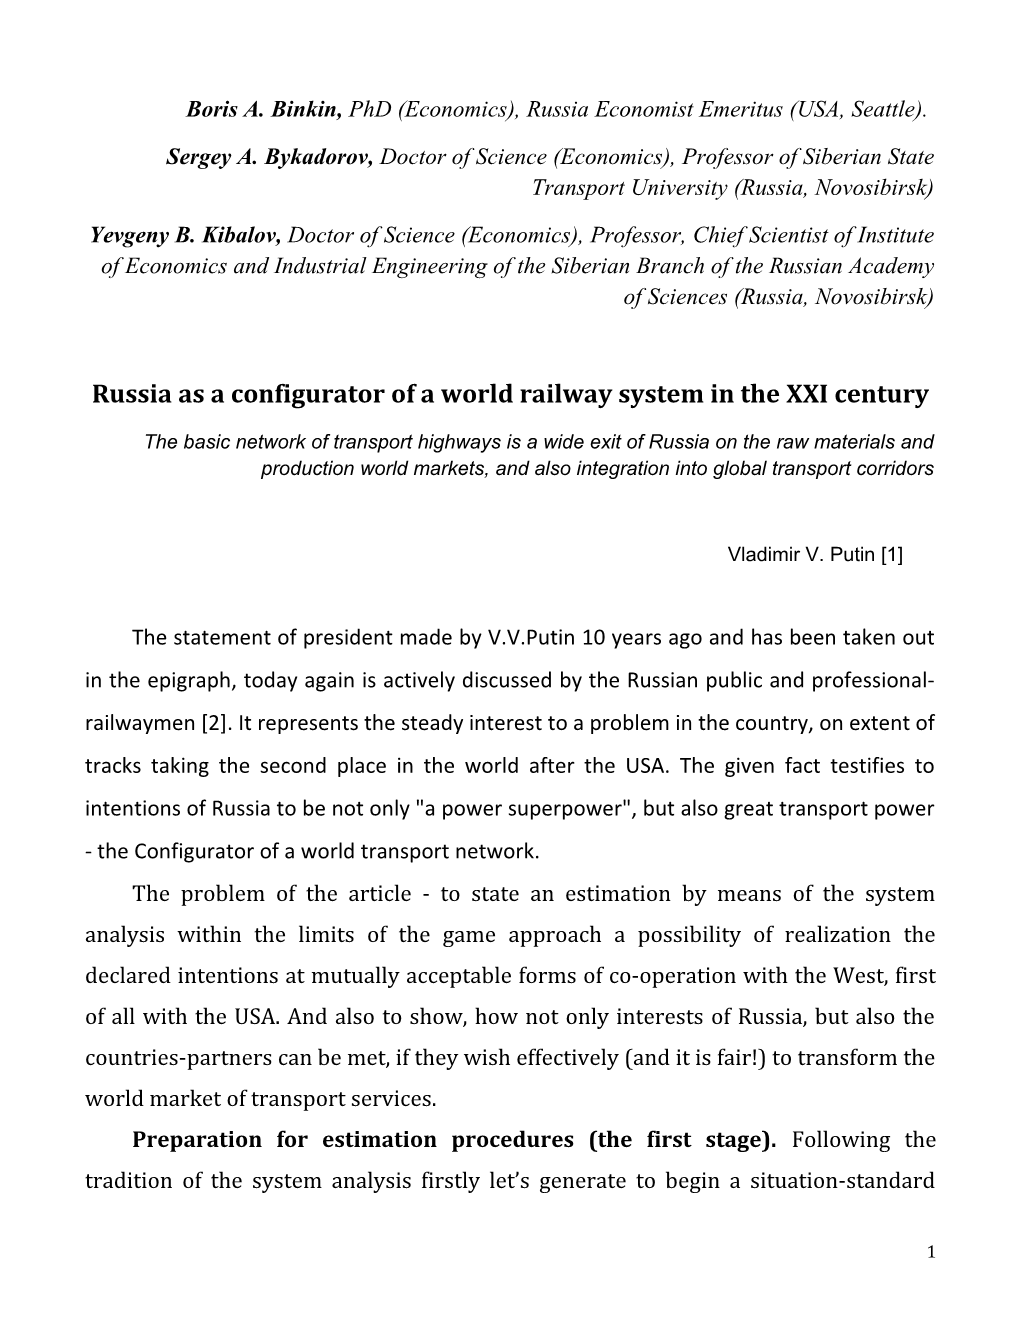 Russia As a Configurator of a World Railway Sysyem in the XXI Century